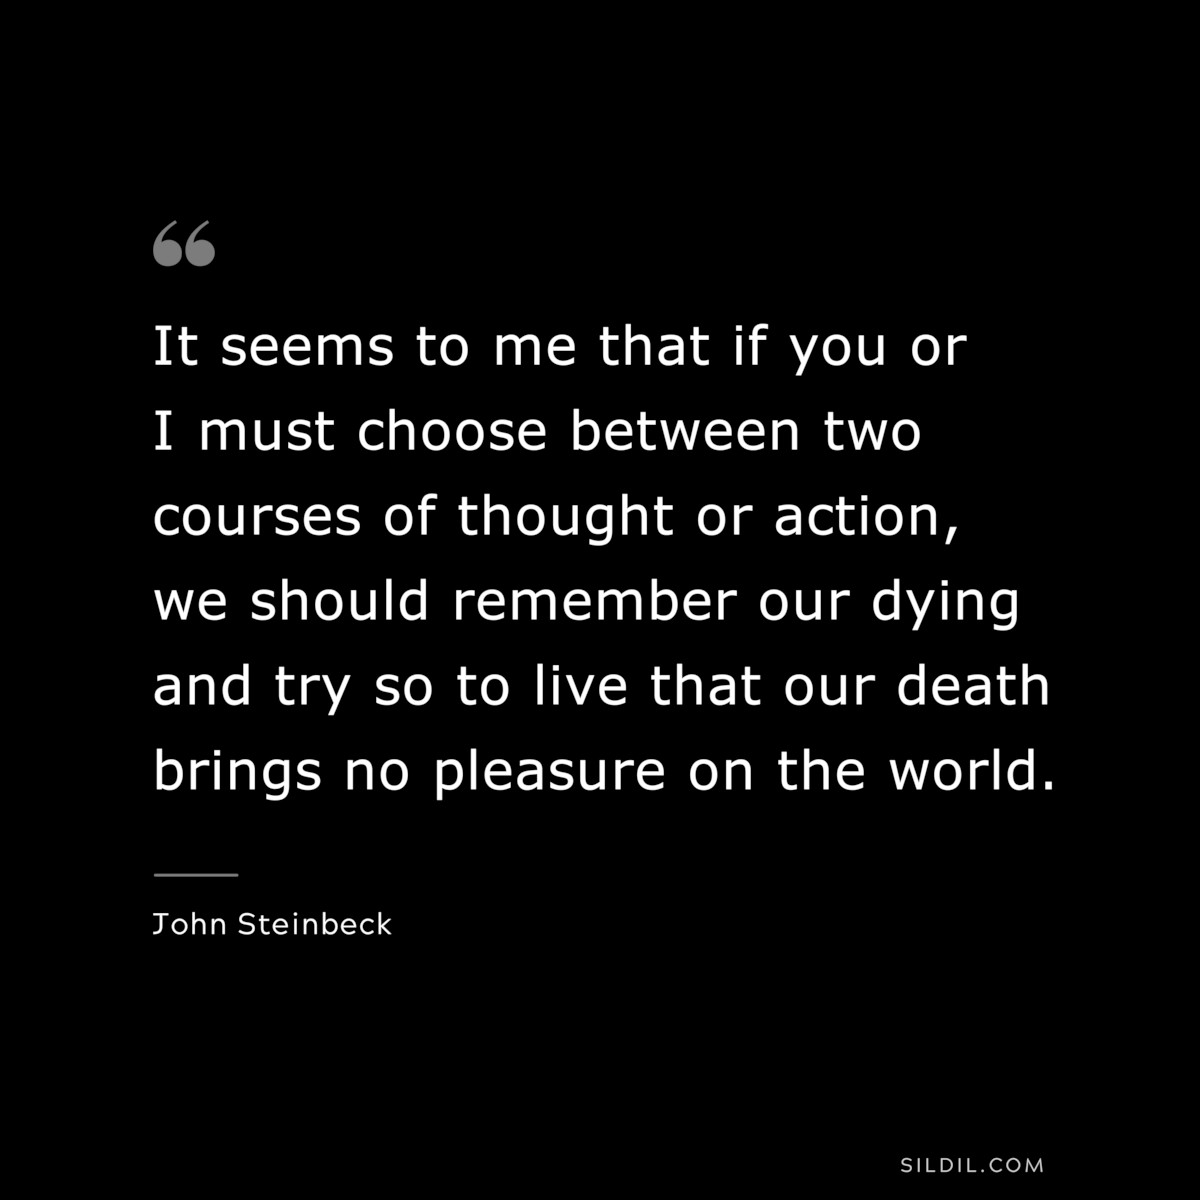 It seems to me that if you or I must choose between two courses of thought or action, we should remember our dying and try so to live that our death brings no pleasure on the world.― John Steinbeck